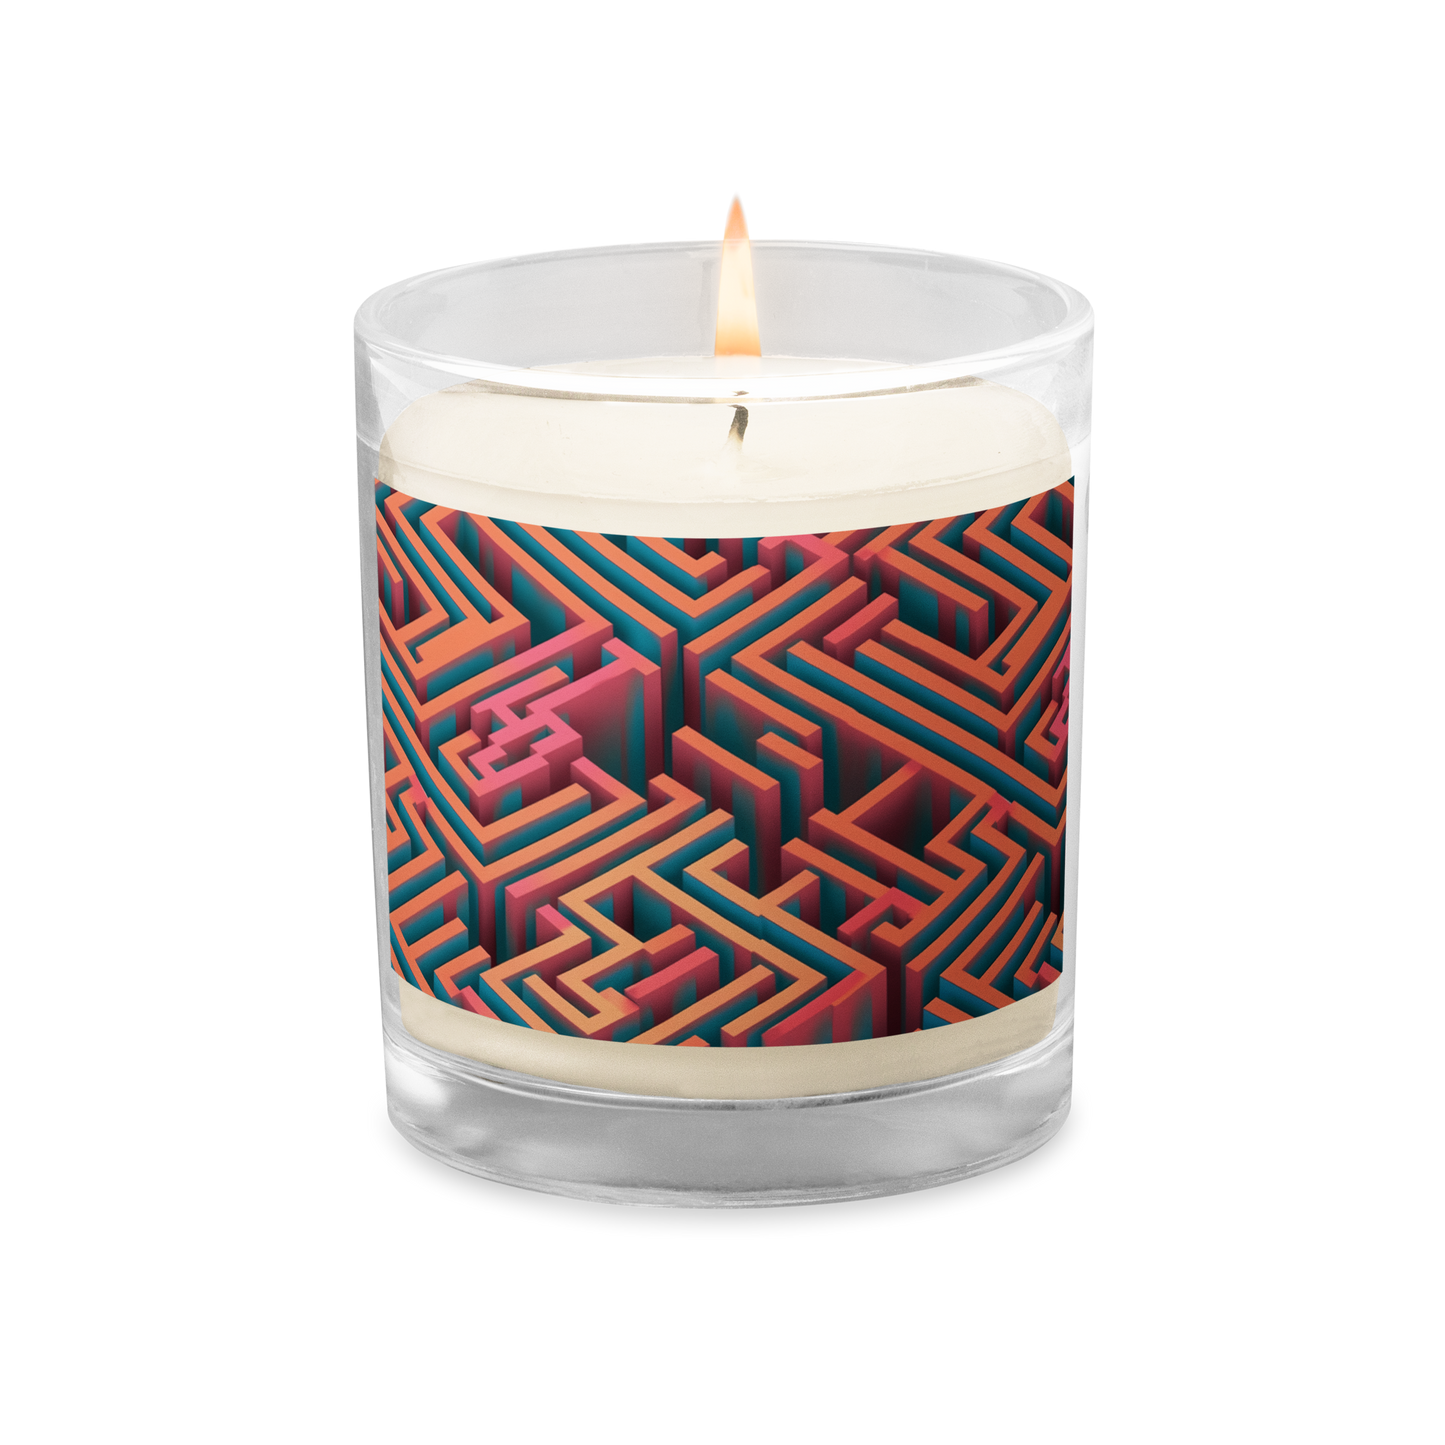 3D Maze Illusion | 3D Patterns | Glass Jar Soy Wax Candle - #1